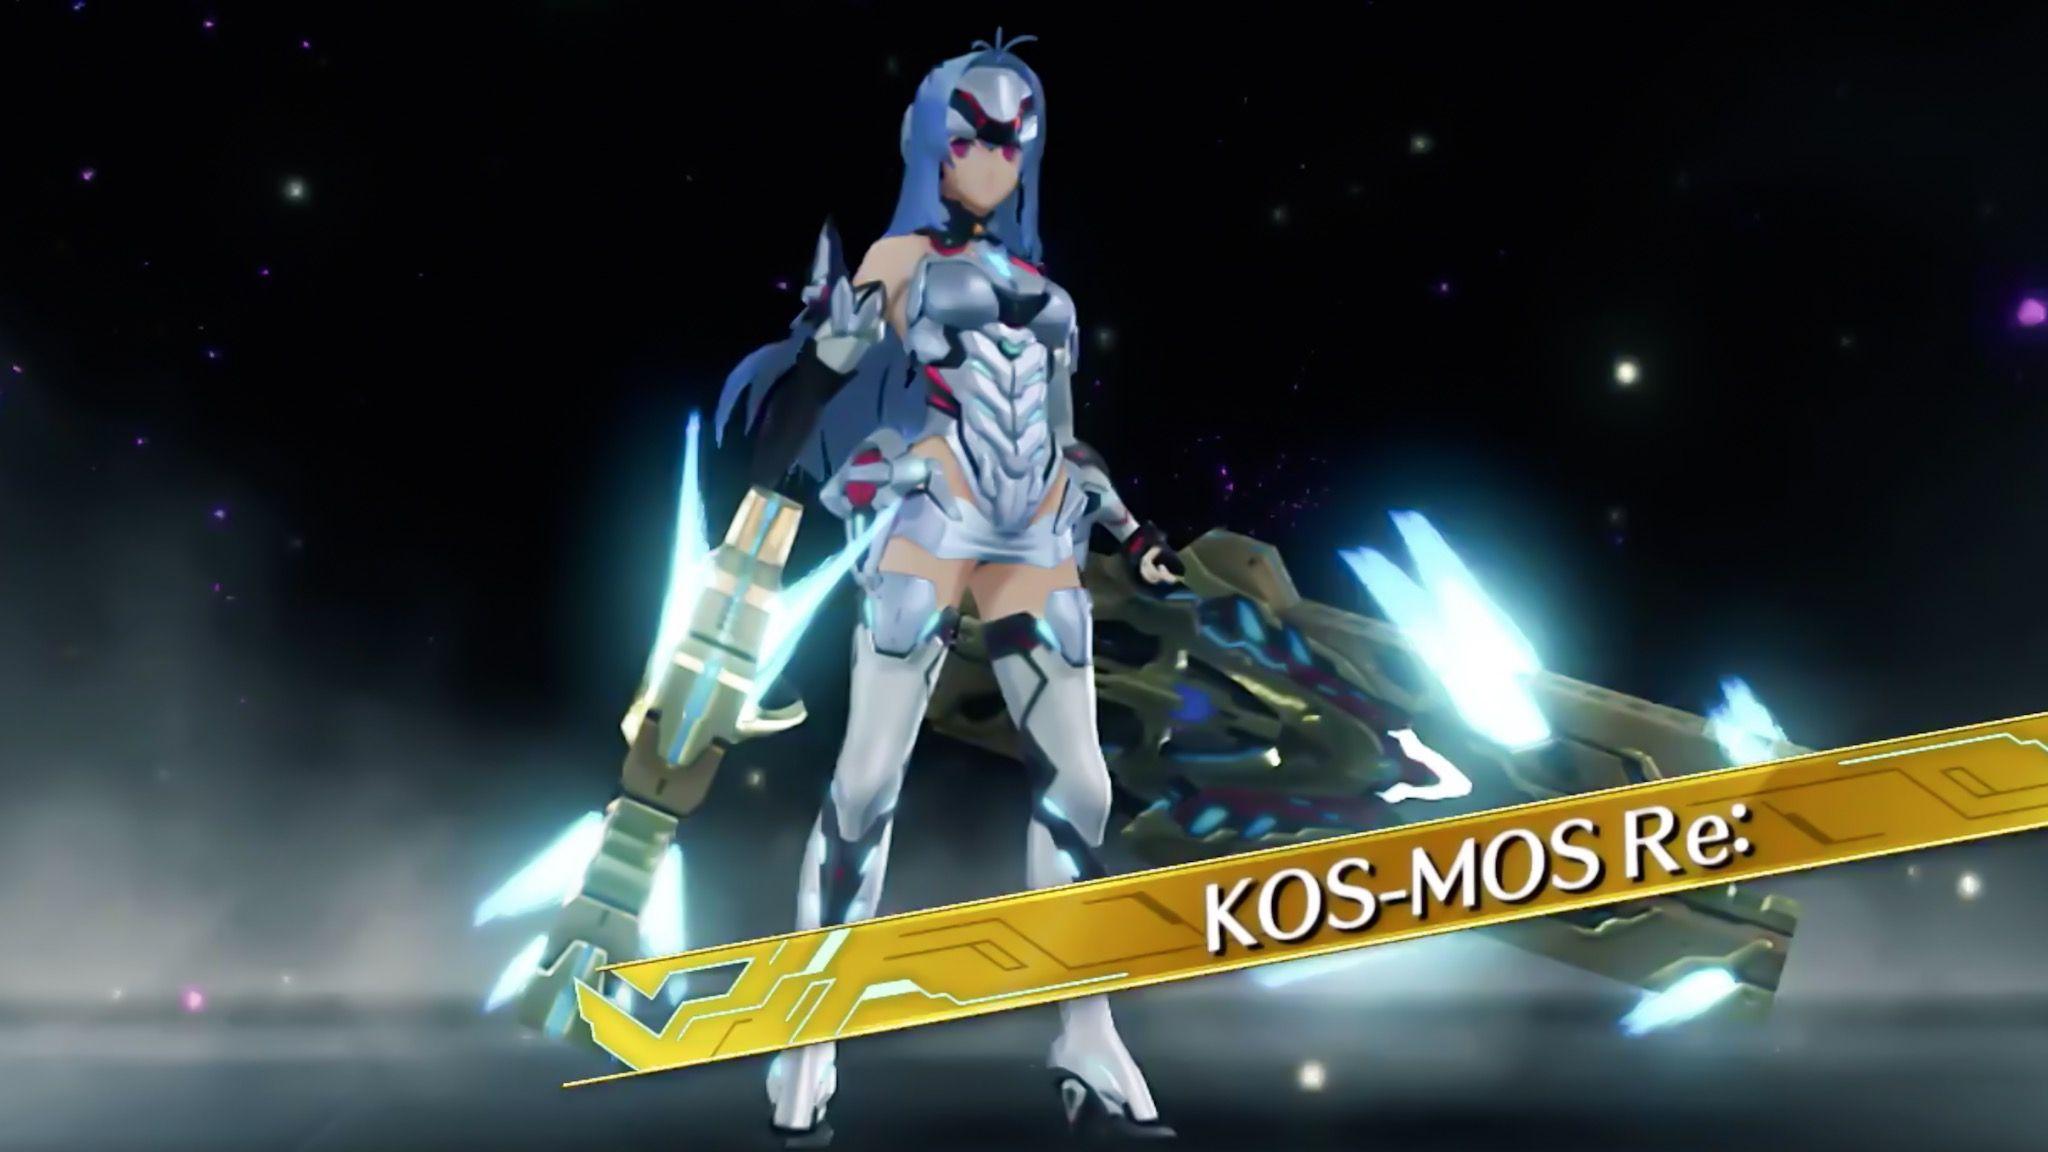 Xenoblade Chronicles 2: KOS MOS Re: Will Appear In Sequel